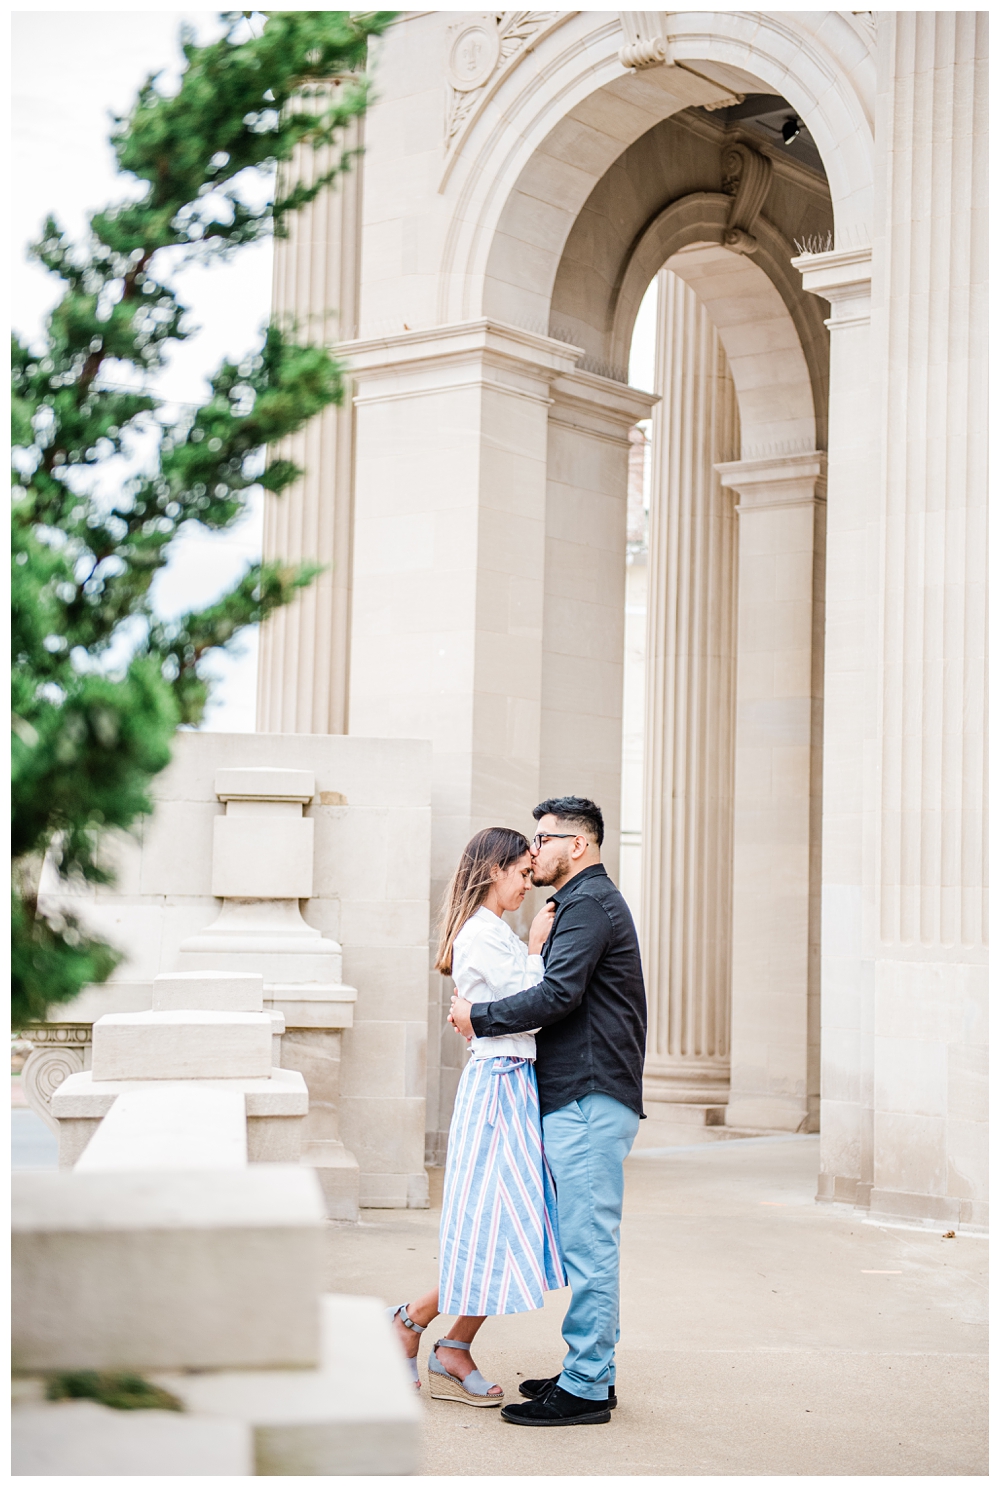 downtown engagement photos; engagements in the city;